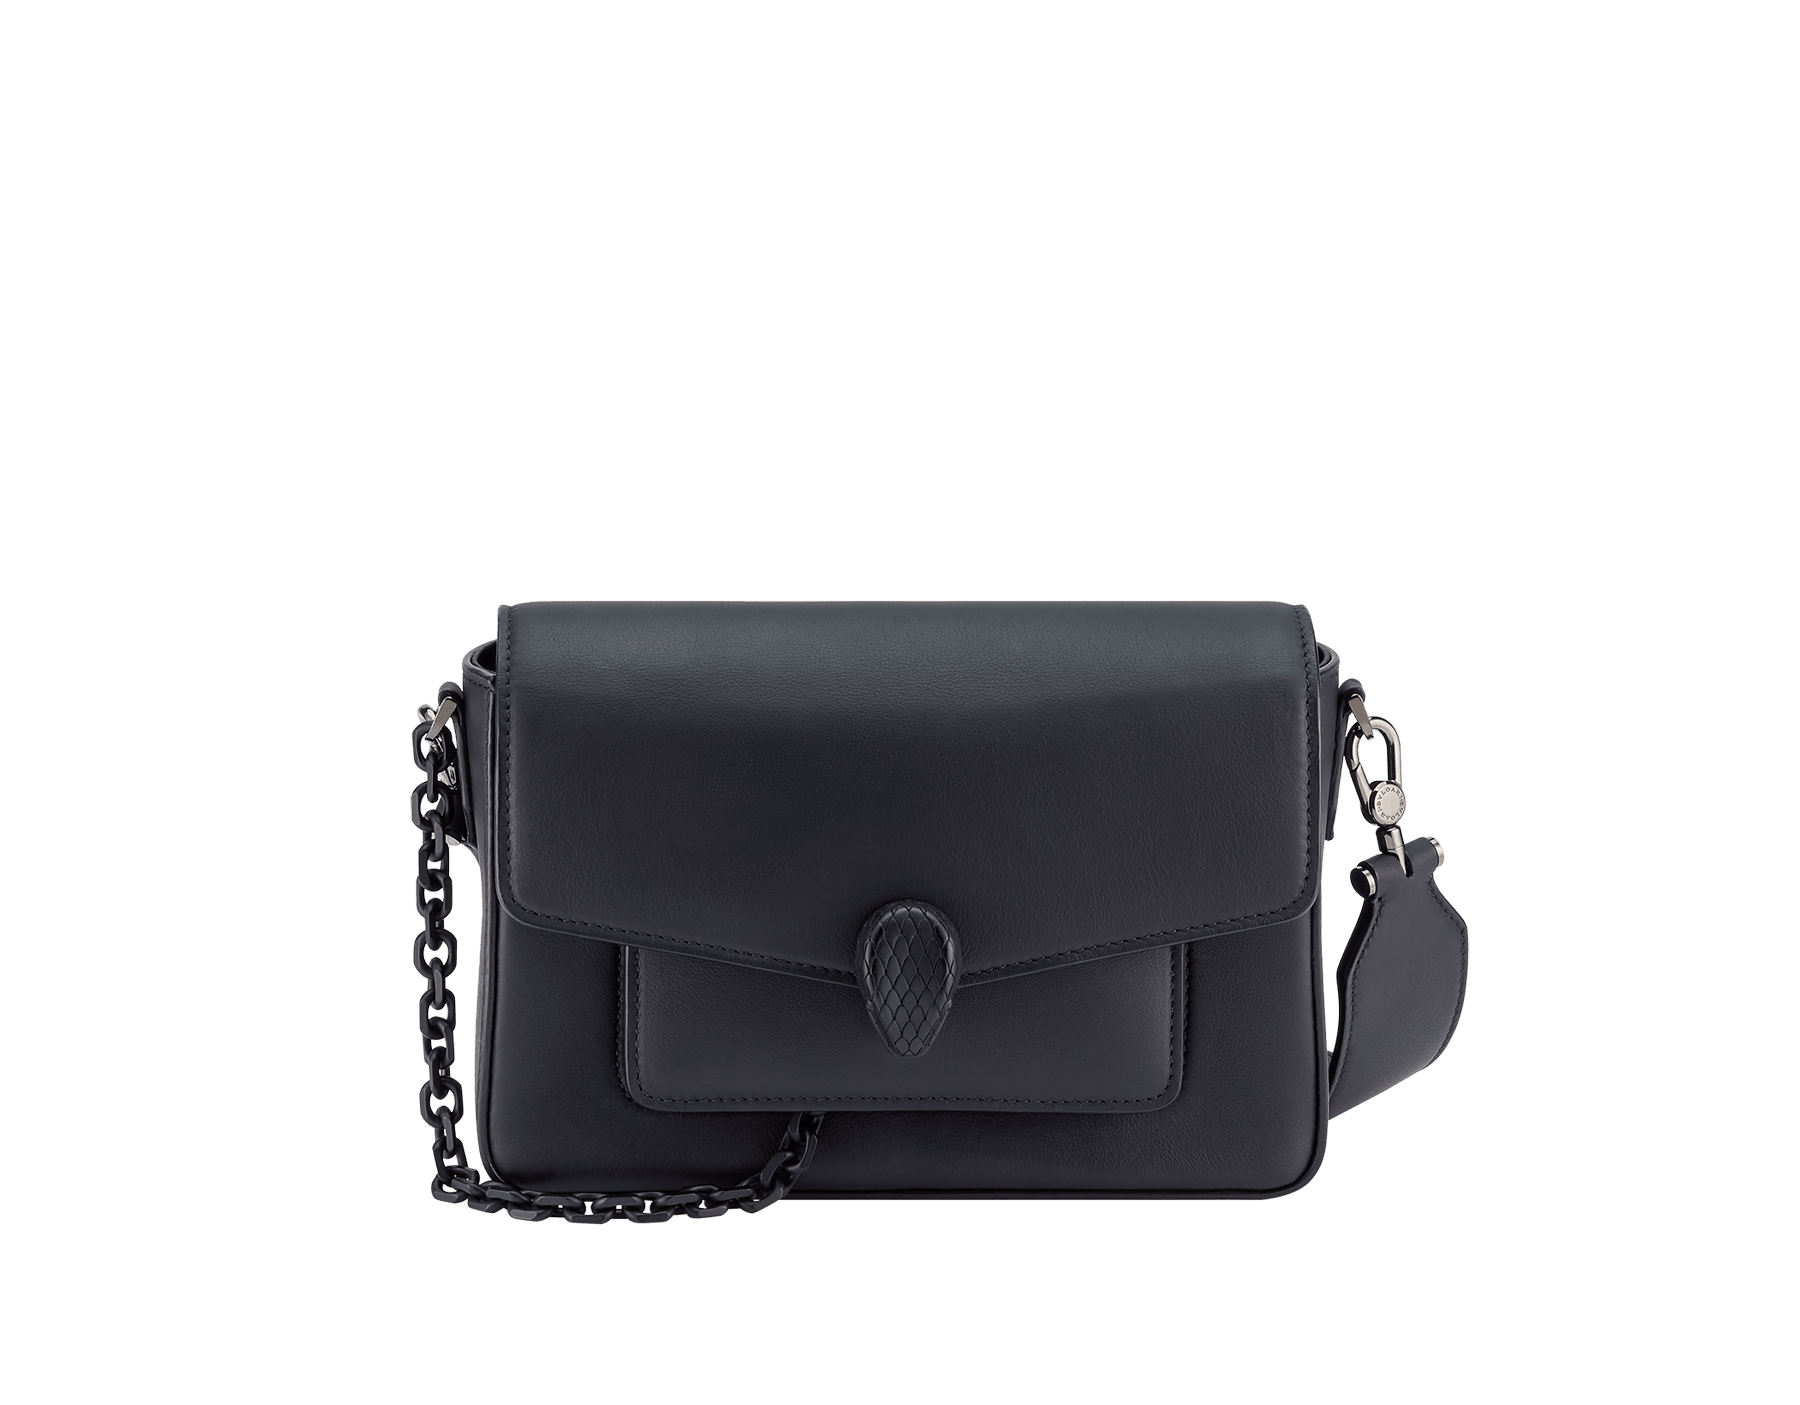 Serpenti Forever small unisex crossbody bag in matt black calf leather with black nappa leather lining and decorative chain enamelled in matt black. Captivating snakehead closure in dark ruthenium-plated brass enamelled in matt black and embellished with red enamel eyes. 291851 image 1